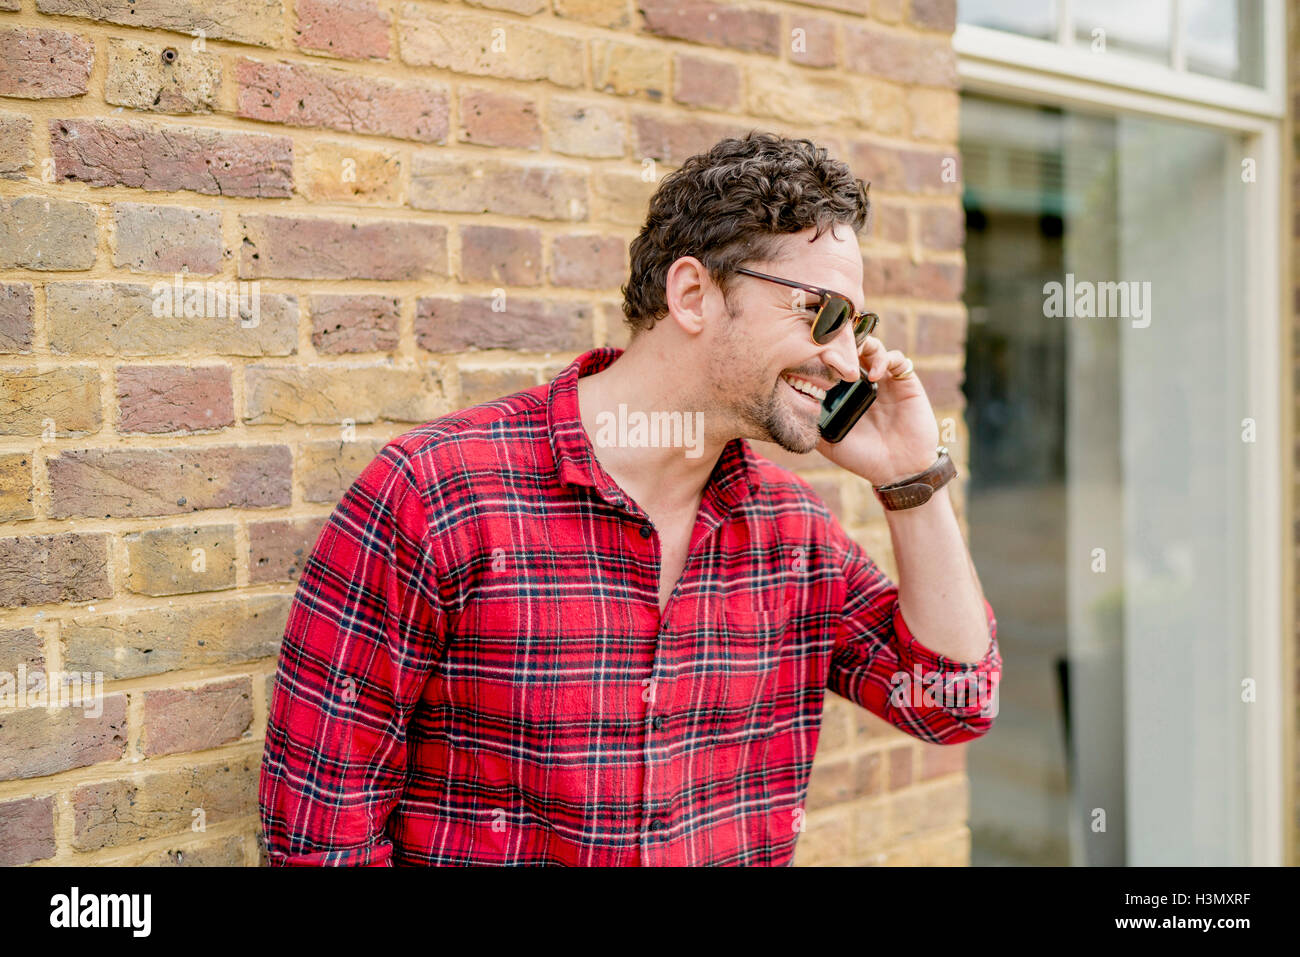 Young man in front of brick wall talking on smartphone Stock Photo